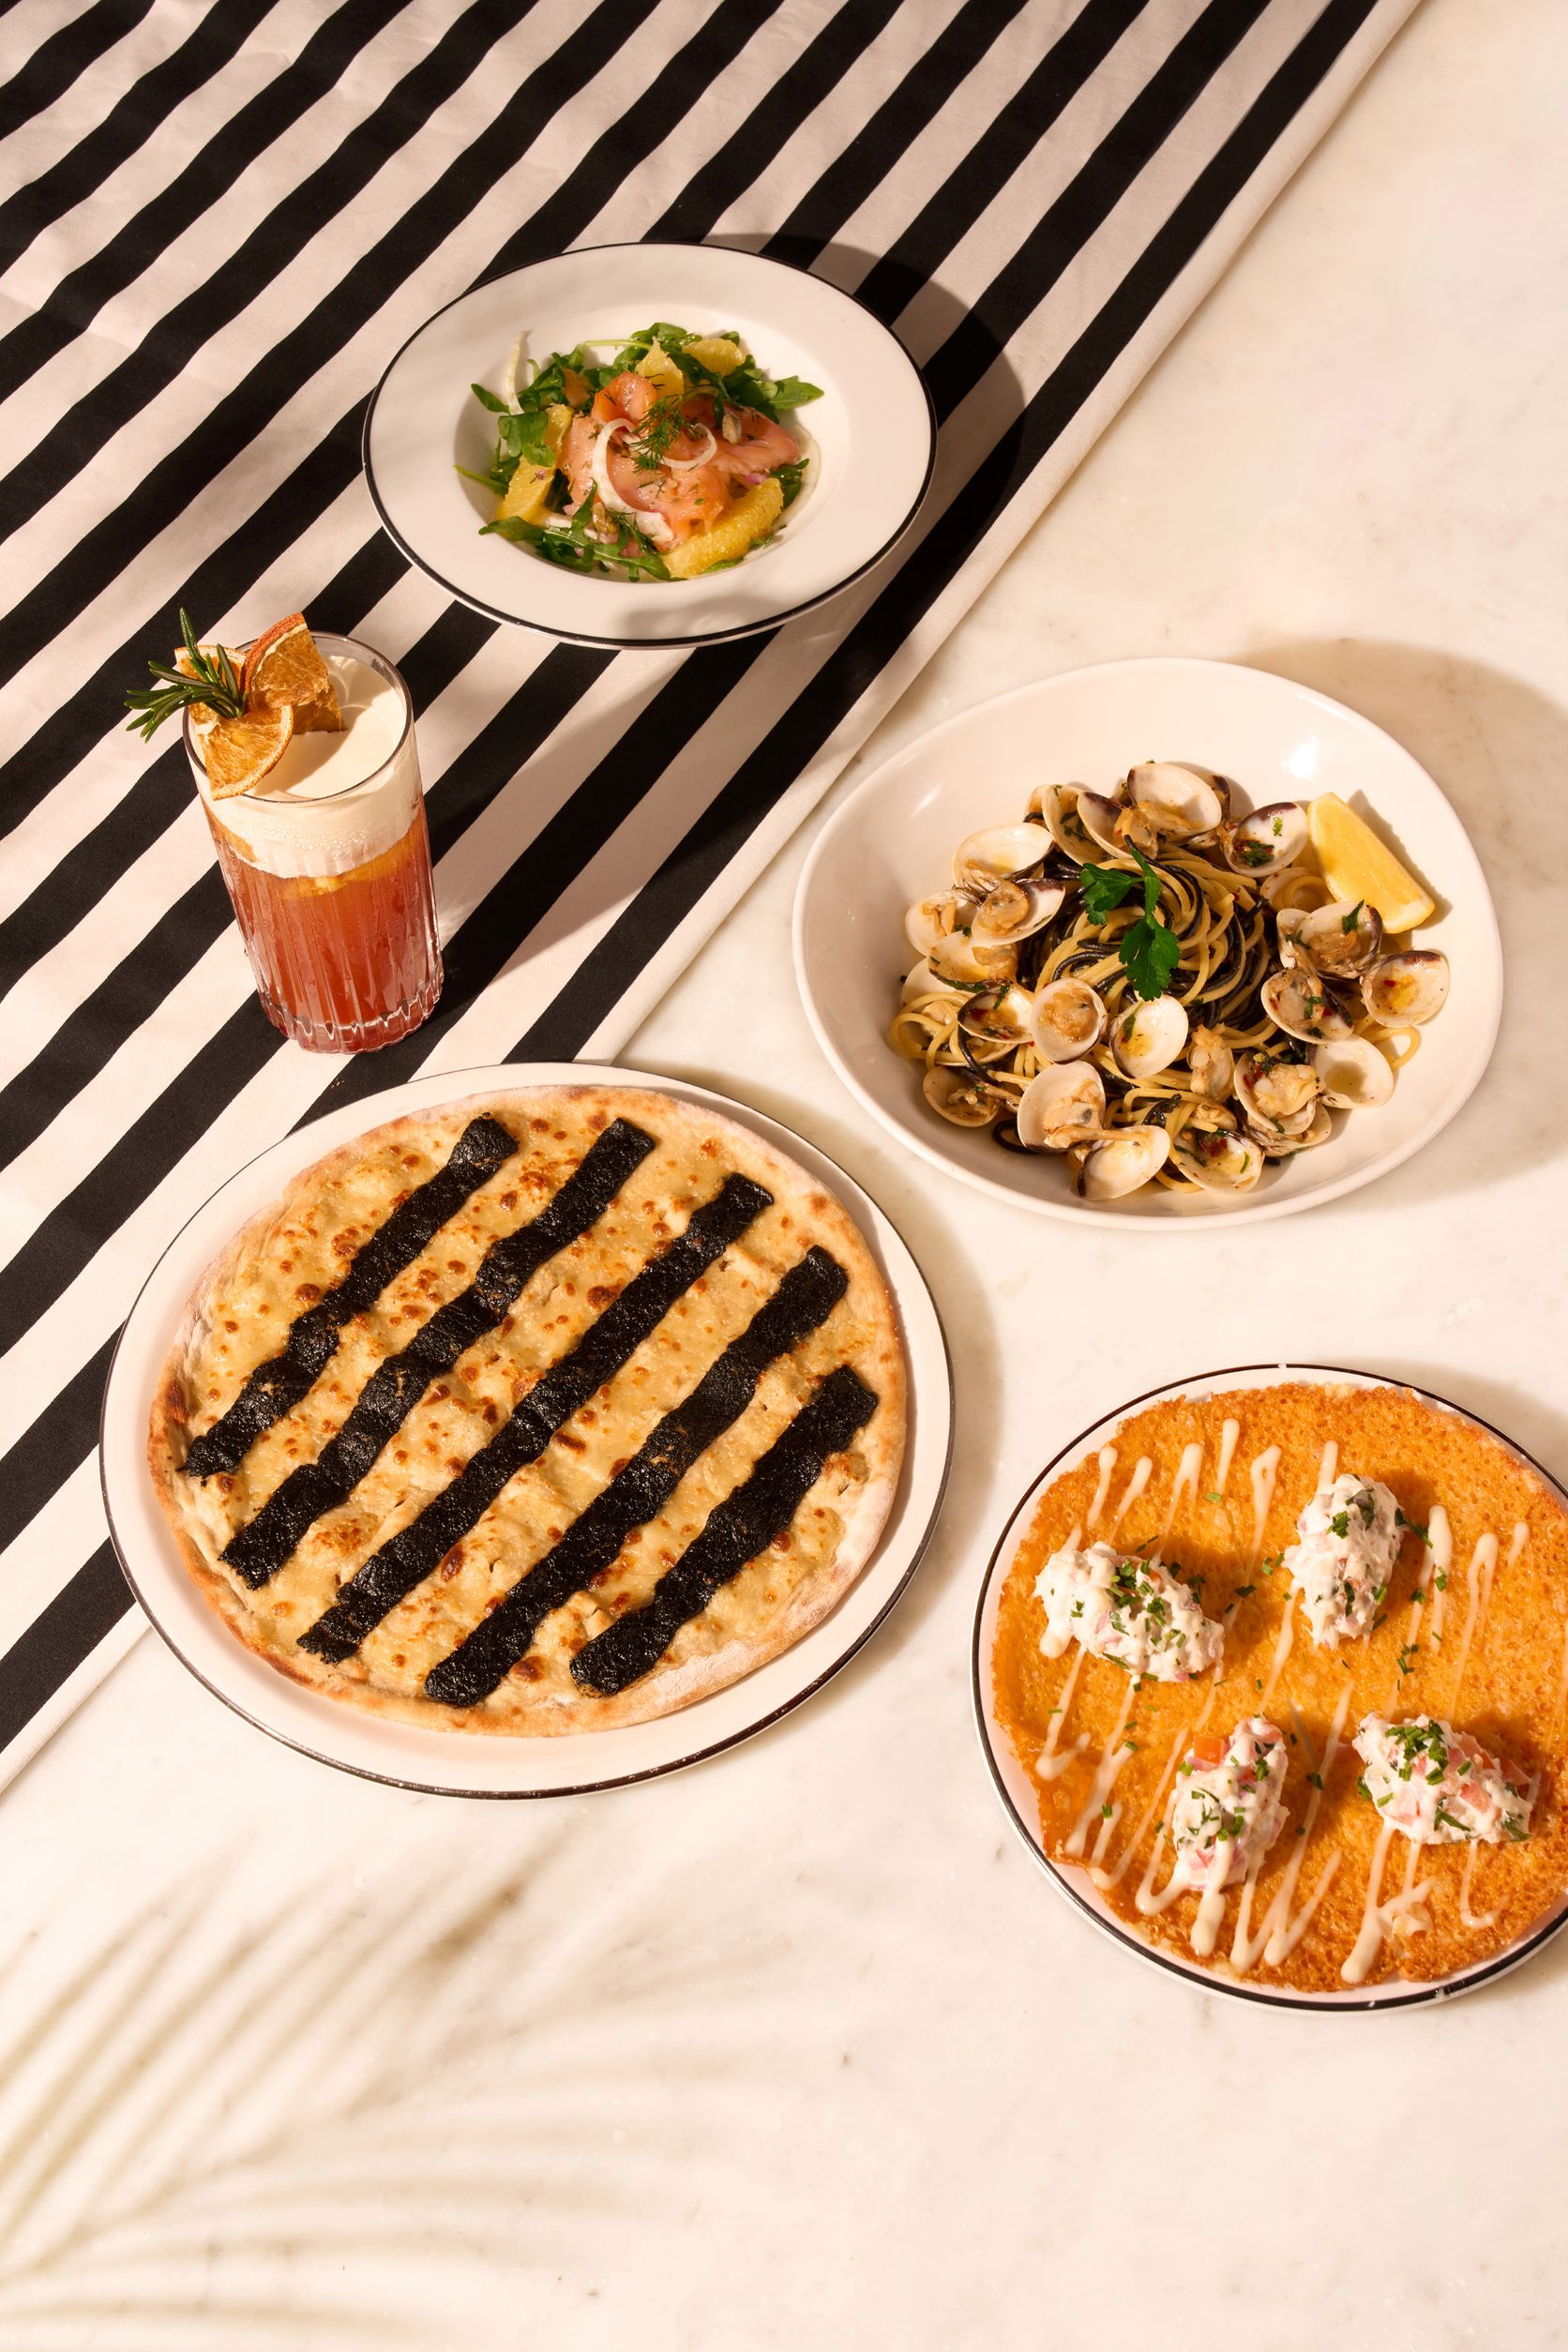 PizzaExpress Celebrates 59th Anniversary with New Dishes